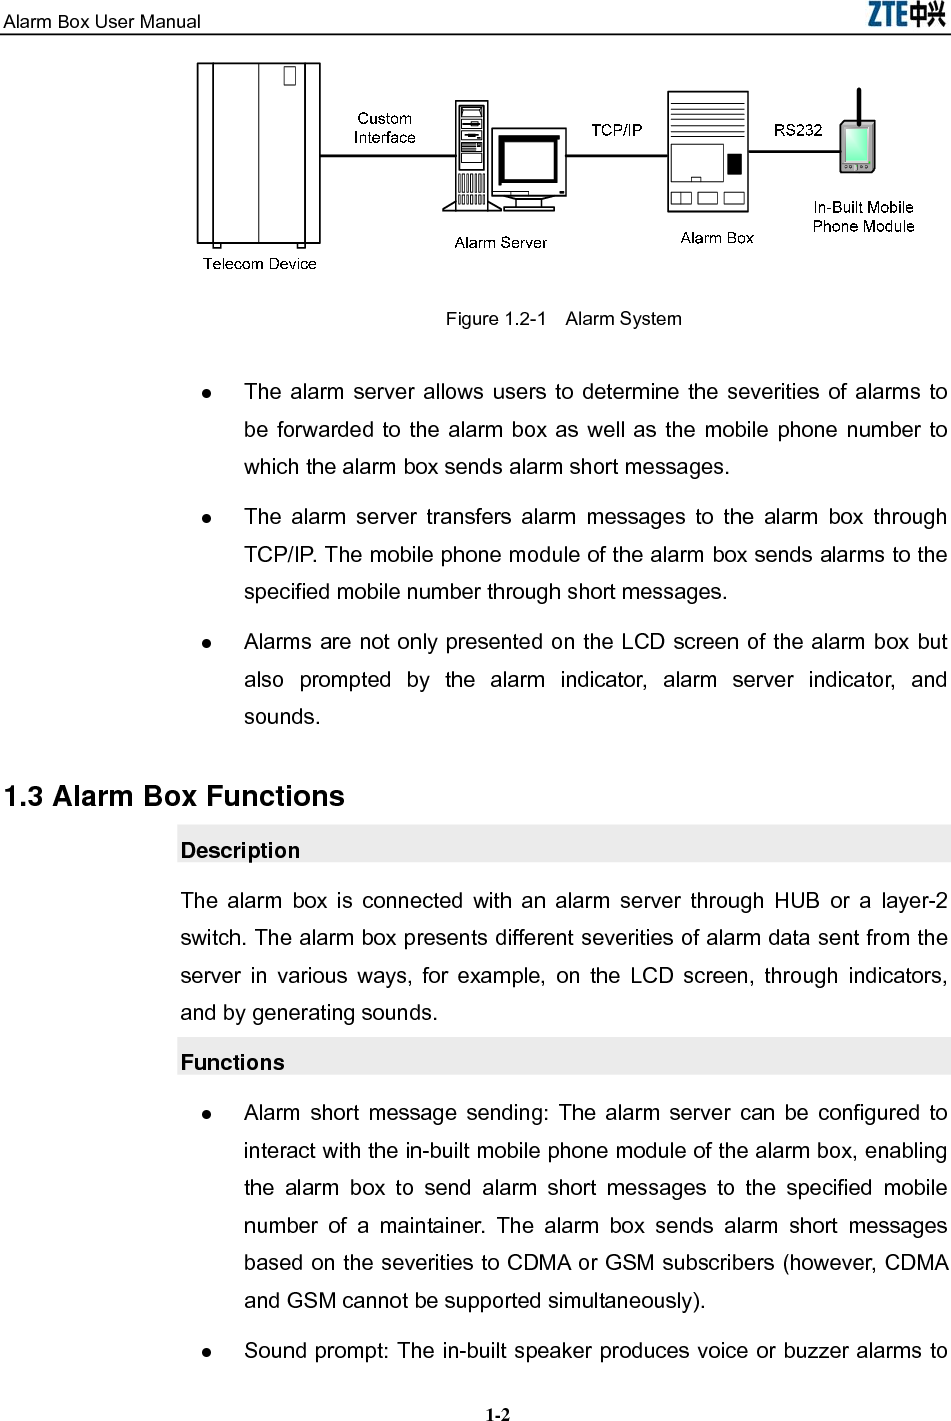 Alarm Box User Manual  1-2TCP/IP告警服务器告警箱内置的手机模块RS232自定义接口告警箱电信设备 Figure 1.2-1    Alarm System  The alarm server allows users to determine the severities of alarms to be forwarded to the alarm box as well as the mobile phone number to which the alarm box sends alarm short messages.  The alarm server transfers alarm messages to the alarm box through TCP/IP. The mobile phone module of the alarm box sends alarms to the specified mobile number through short messages.  Alarms are not only presented on the LCD screen of the alarm box but also prompted by the alarm indicator, alarm server indicator, and sounds. 1.3 Alarm Box Functions Description The alarm box is connected with an alarm server through HUB or a layer-2 switch. The alarm box presents different severities of alarm data sent from the server in various ways, for example, on the LCD screen, through indicators, and by generating sounds. Functions  Alarm short message sending: The alarm server can be configured to interact with the in-built mobile phone module of the alarm box, enabling the alarm box to send alarm short messages to the specified mobile number of a maintainer. The alarm box sends alarm short messages based on the severities to CDMA or GSM subscribers (however, CDMA and GSM cannot be supported simultaneously).  Sound prompt: The in-built speaker produces voice or buzzer alarms to 